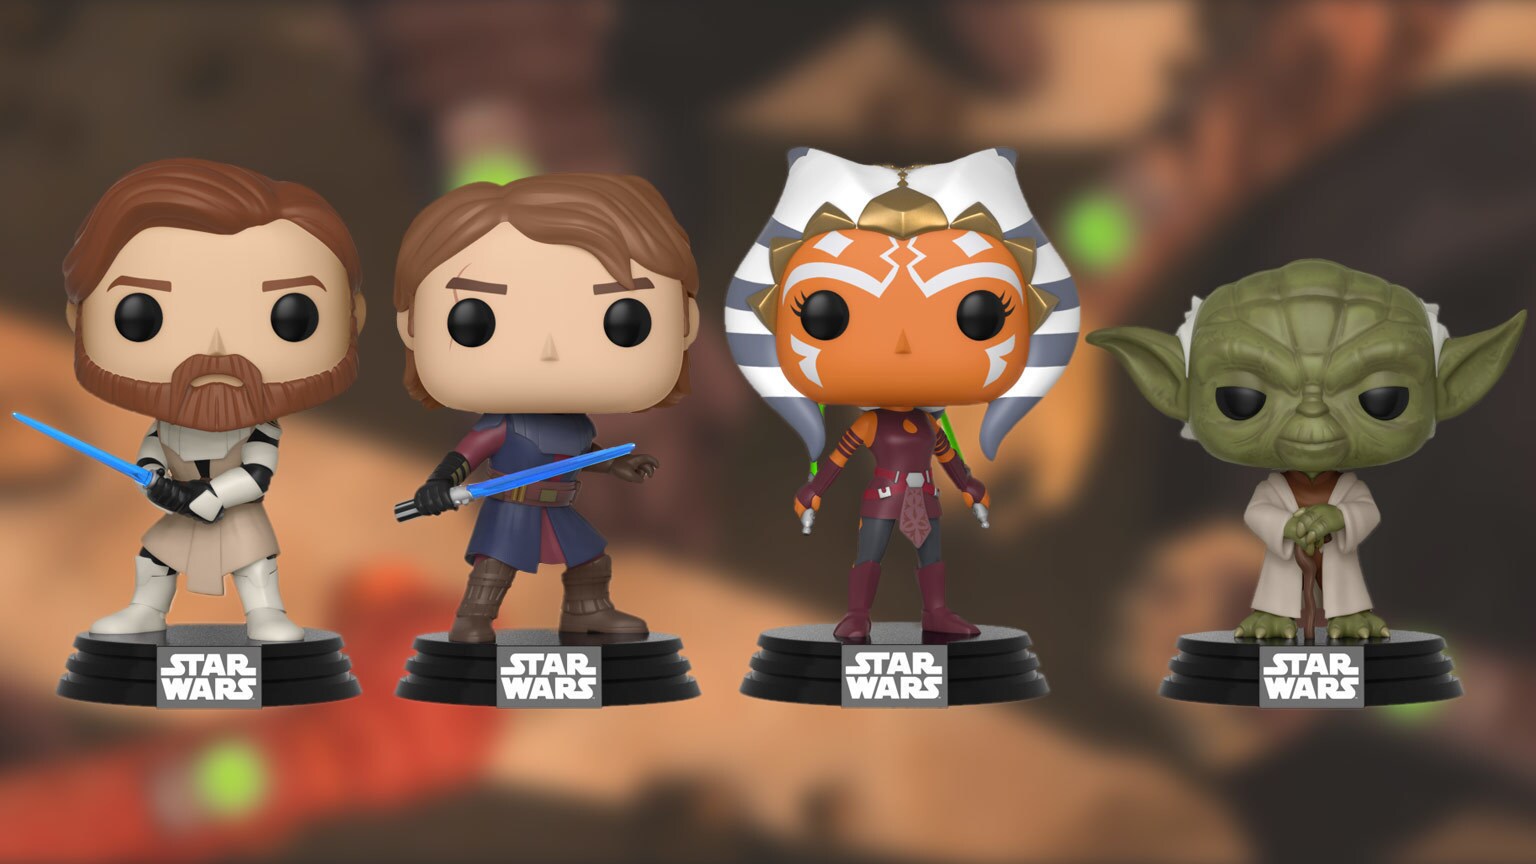 Pop! Goes Star Wars: The Clone Wars: A Q&A with Funko's Reis O